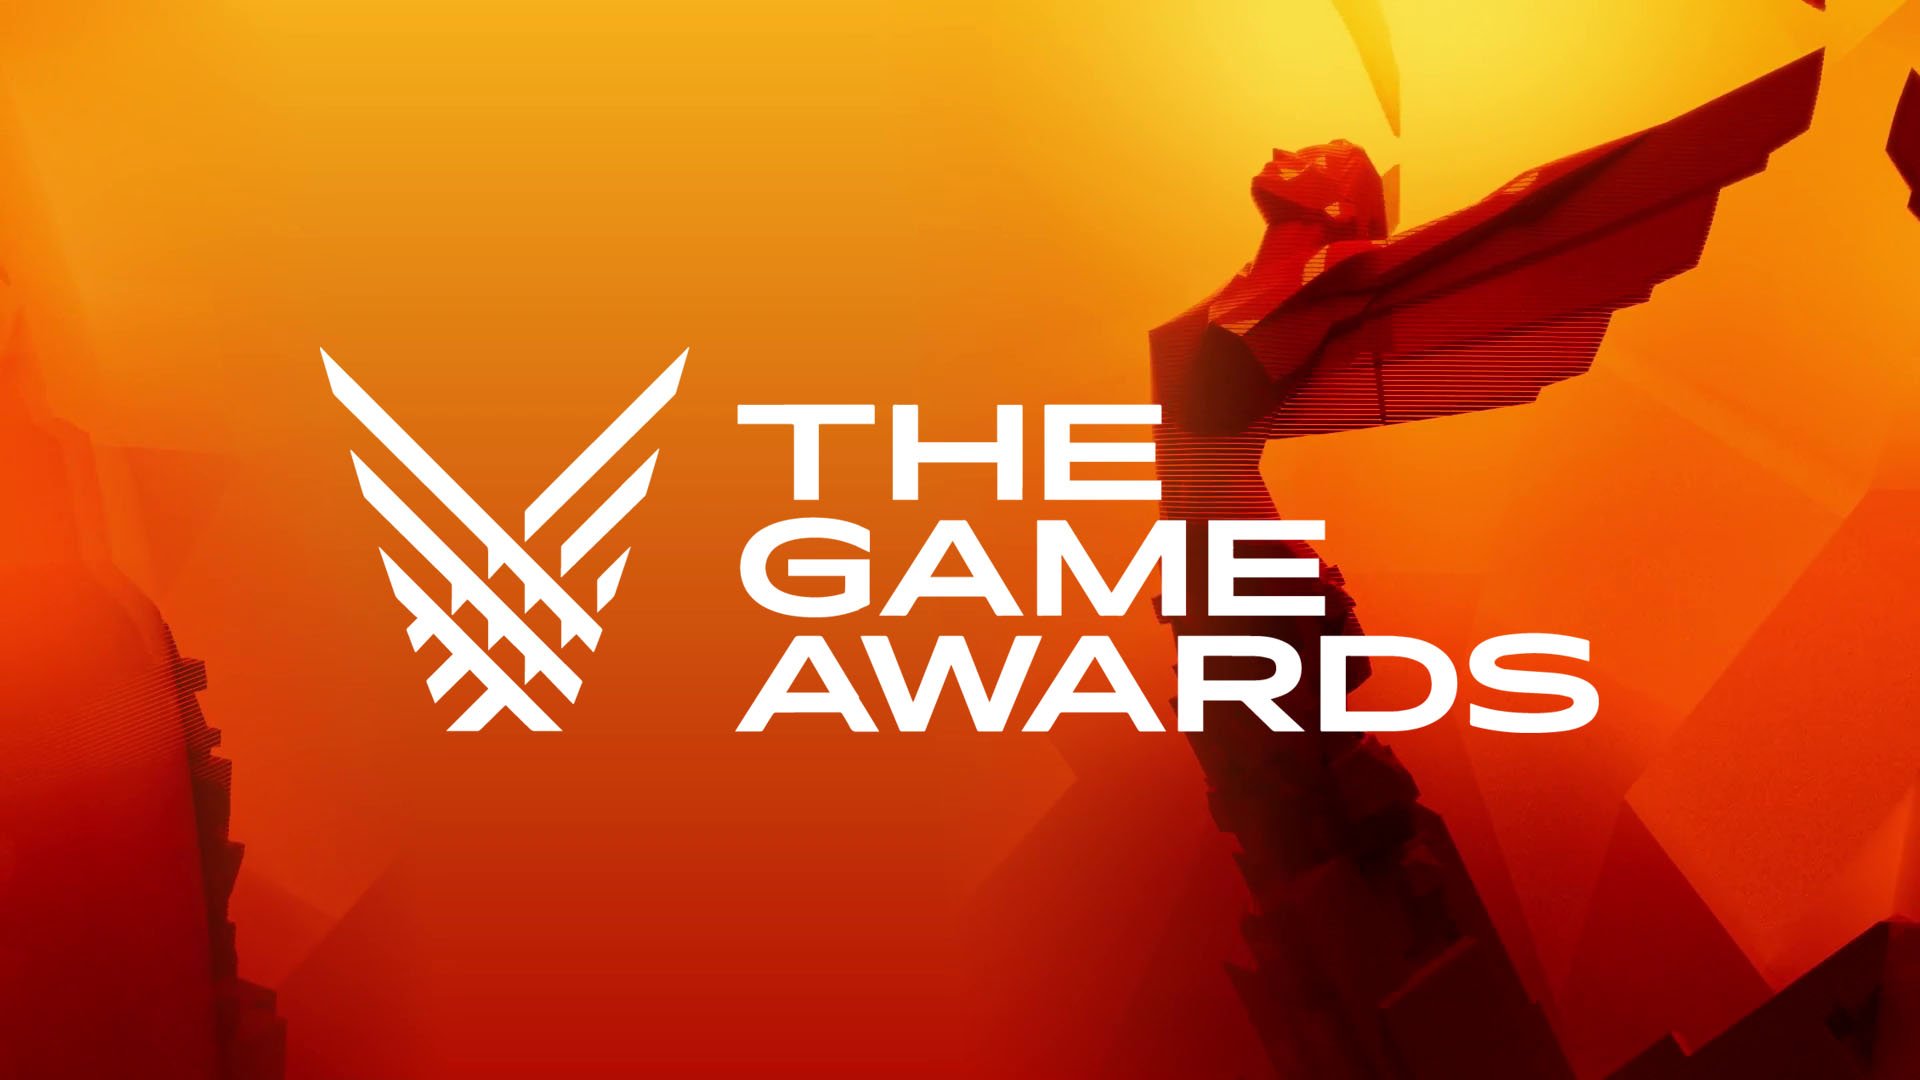 The Game Awards Nominees for 2022 are VERY WEIRDbut here are MY PICKS! 